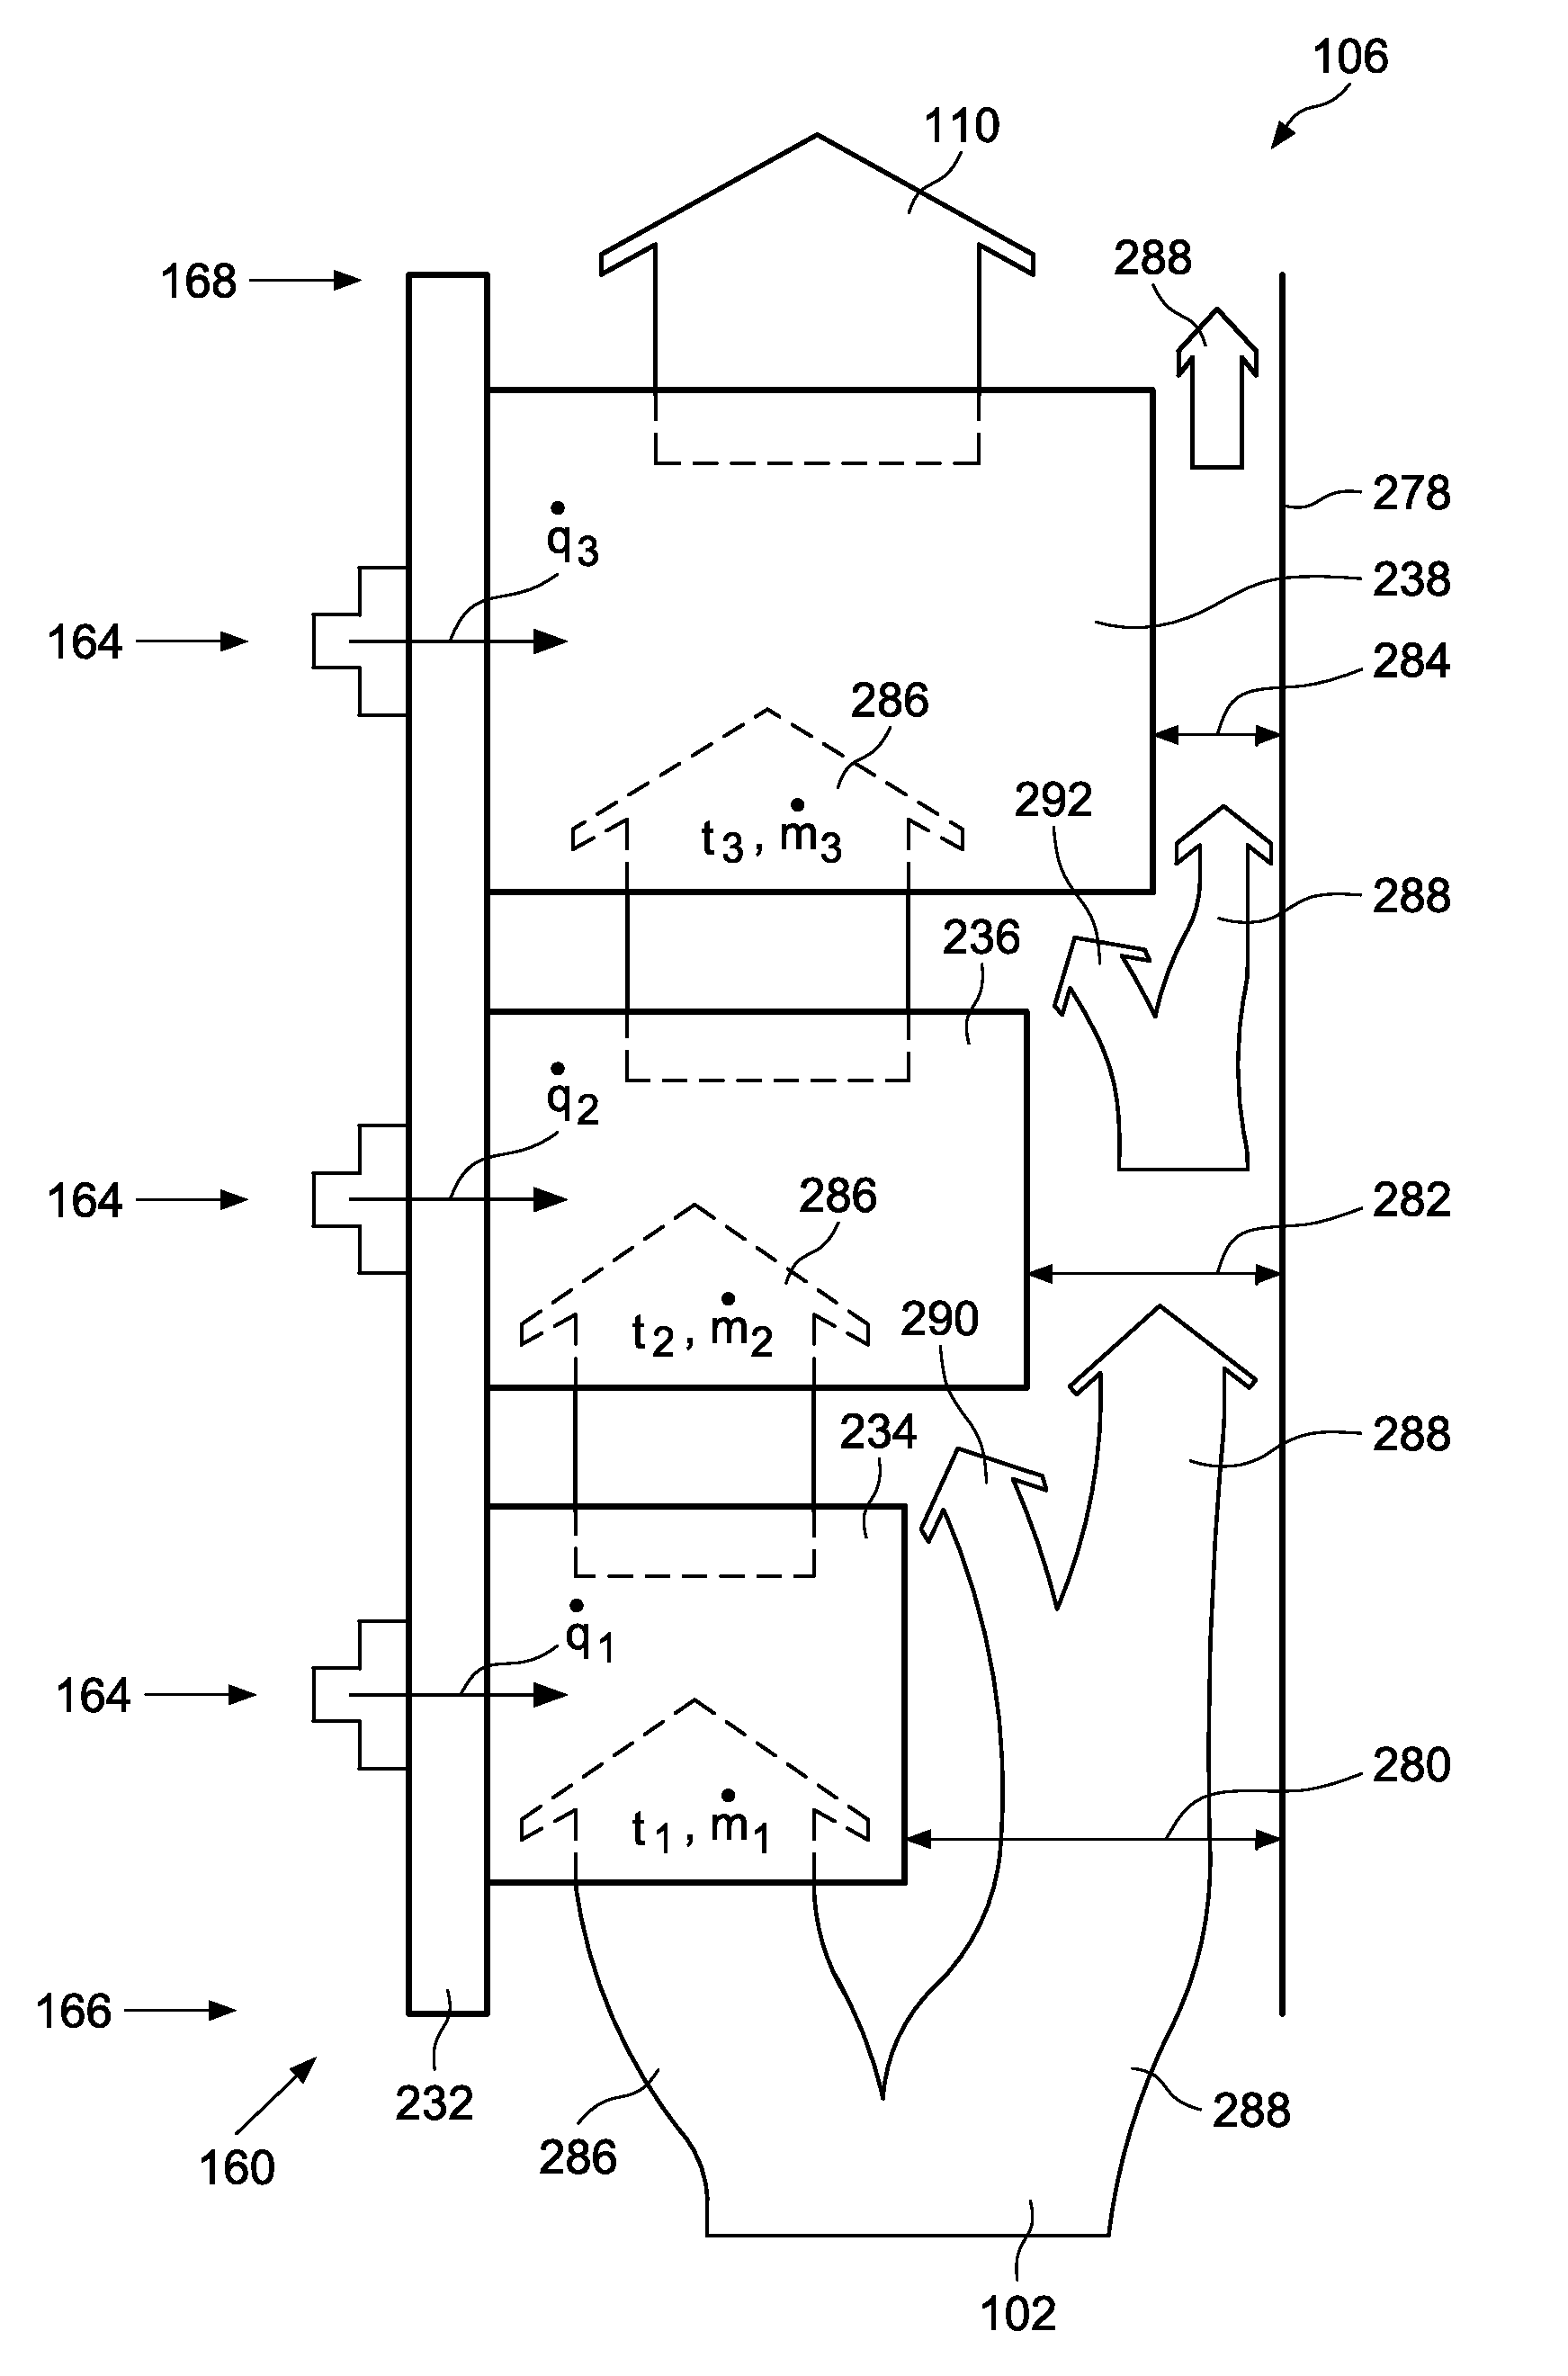 Heat sink cooling arrangement for multiple power electronic circuits